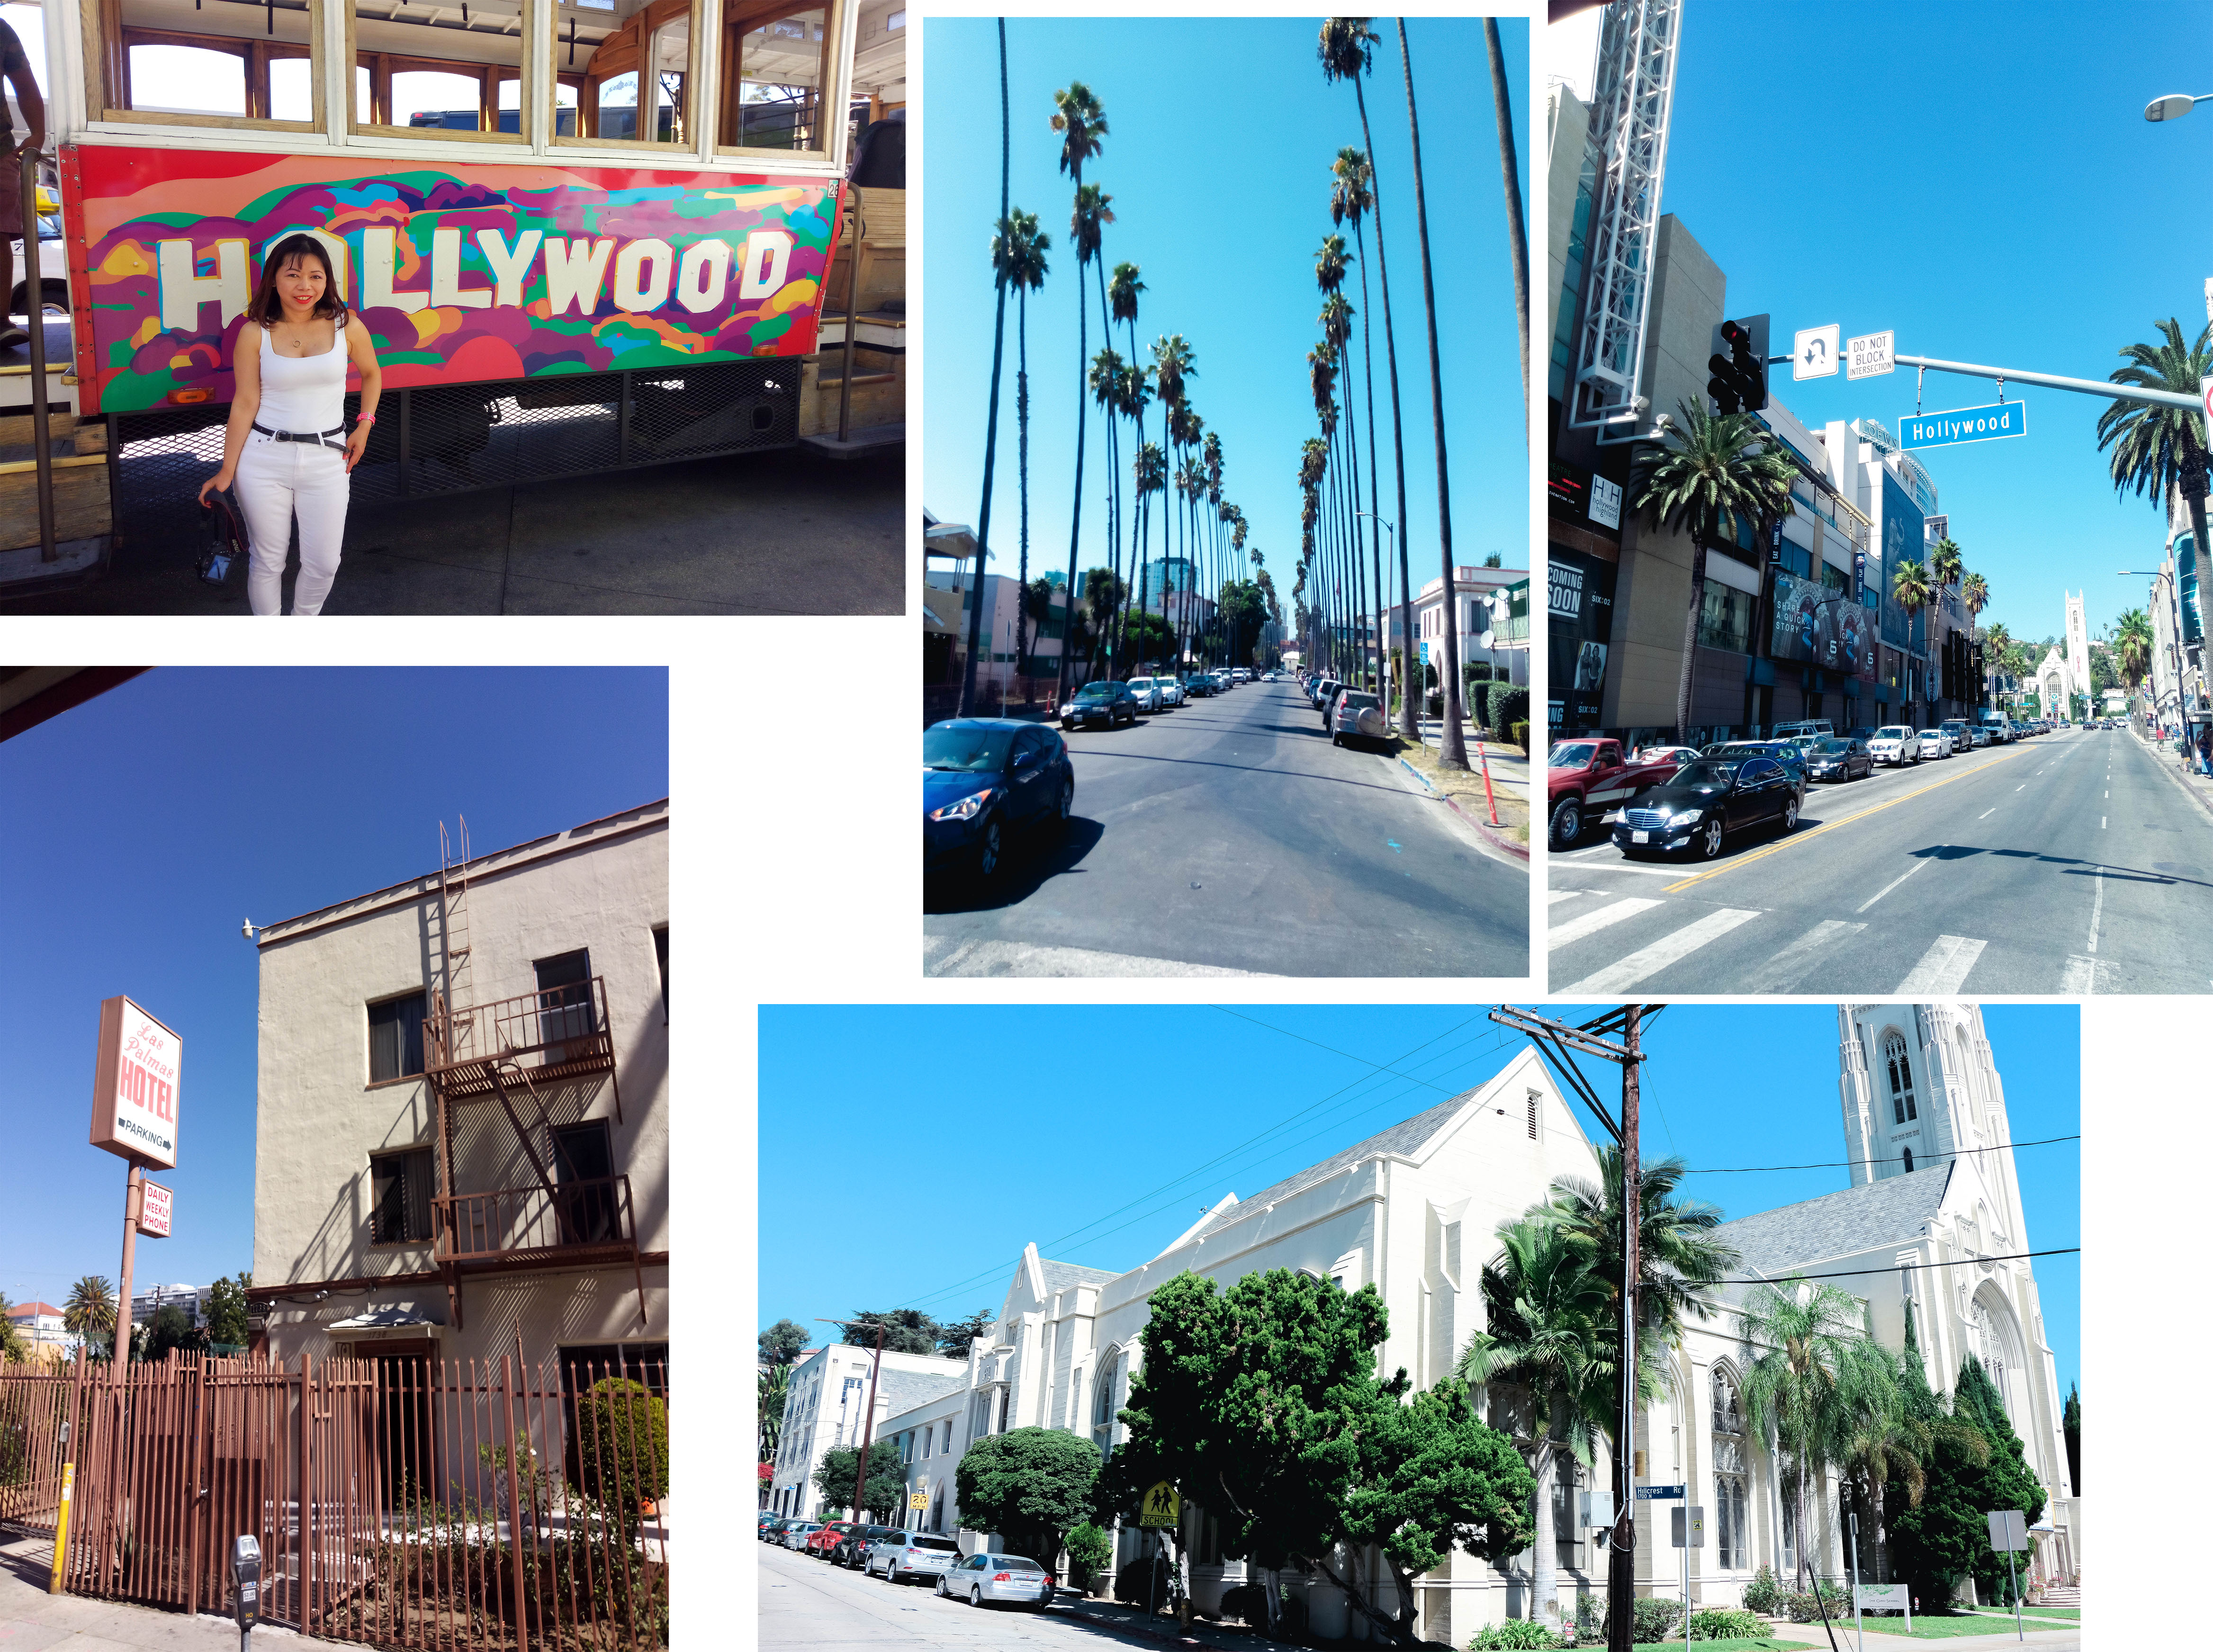 Hollywood Tours